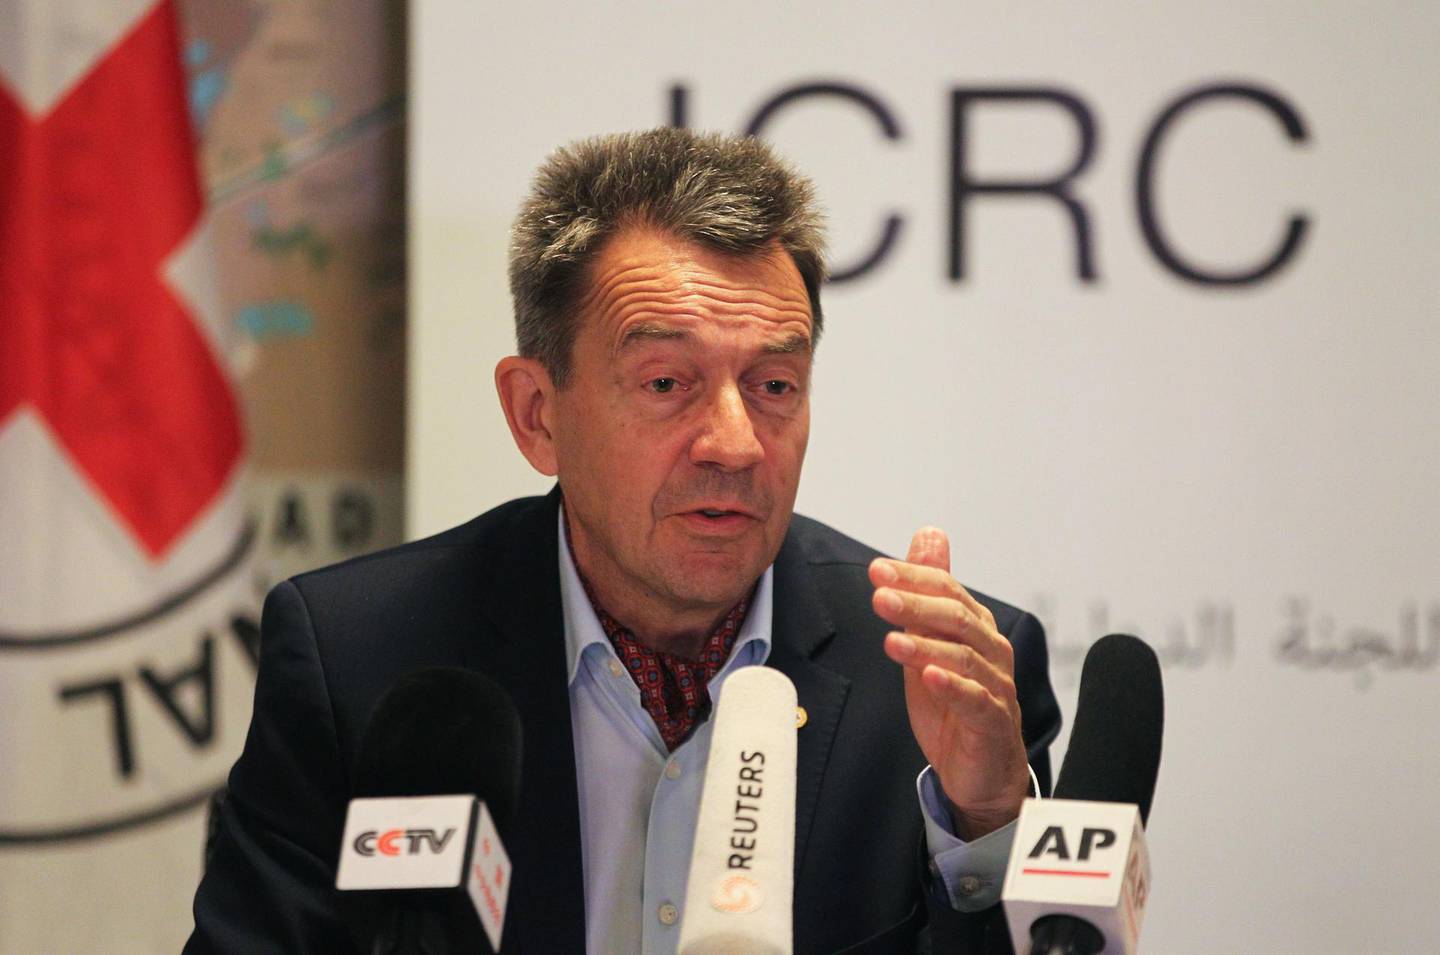 Peter Maurer, President of the International Committee of the Red Cross (ICRC), gives a press conference in Baghdad on the humanitarian situation in Iraq after three years of conflict against the Islamic State group on March 7, 2018.  / AFP PHOTO / AHMAD AL-RUBAYE